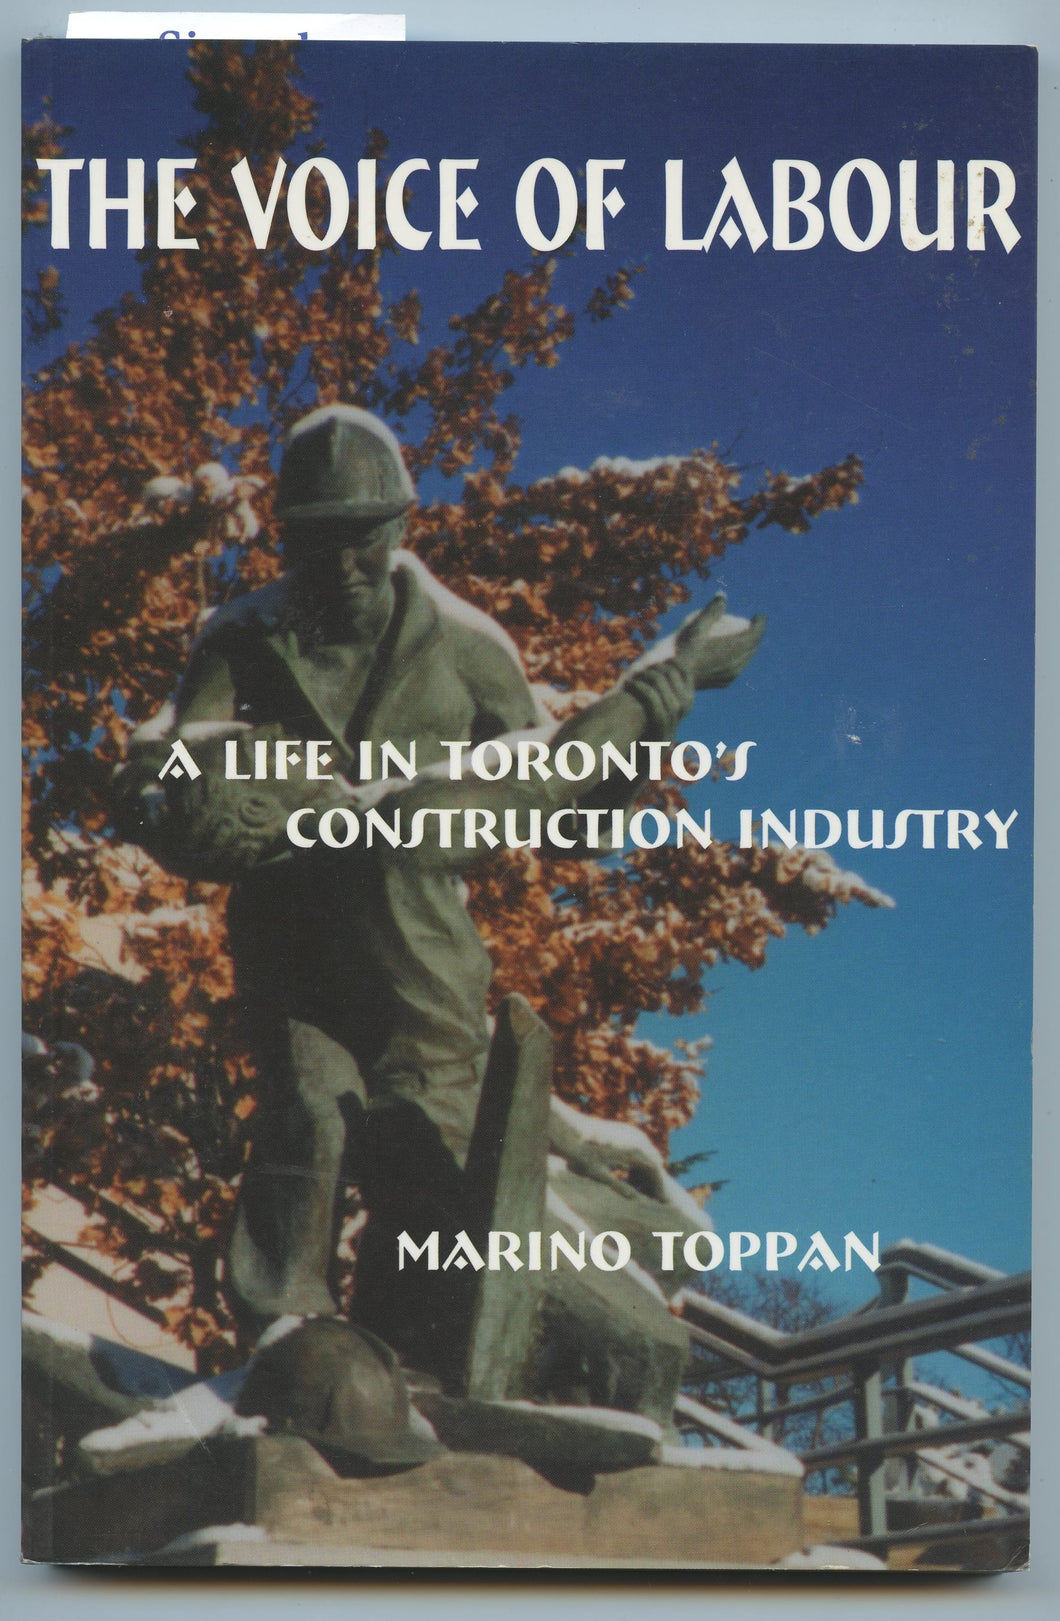 The Voice of Labour: A Life in Toronto's Construction Industry